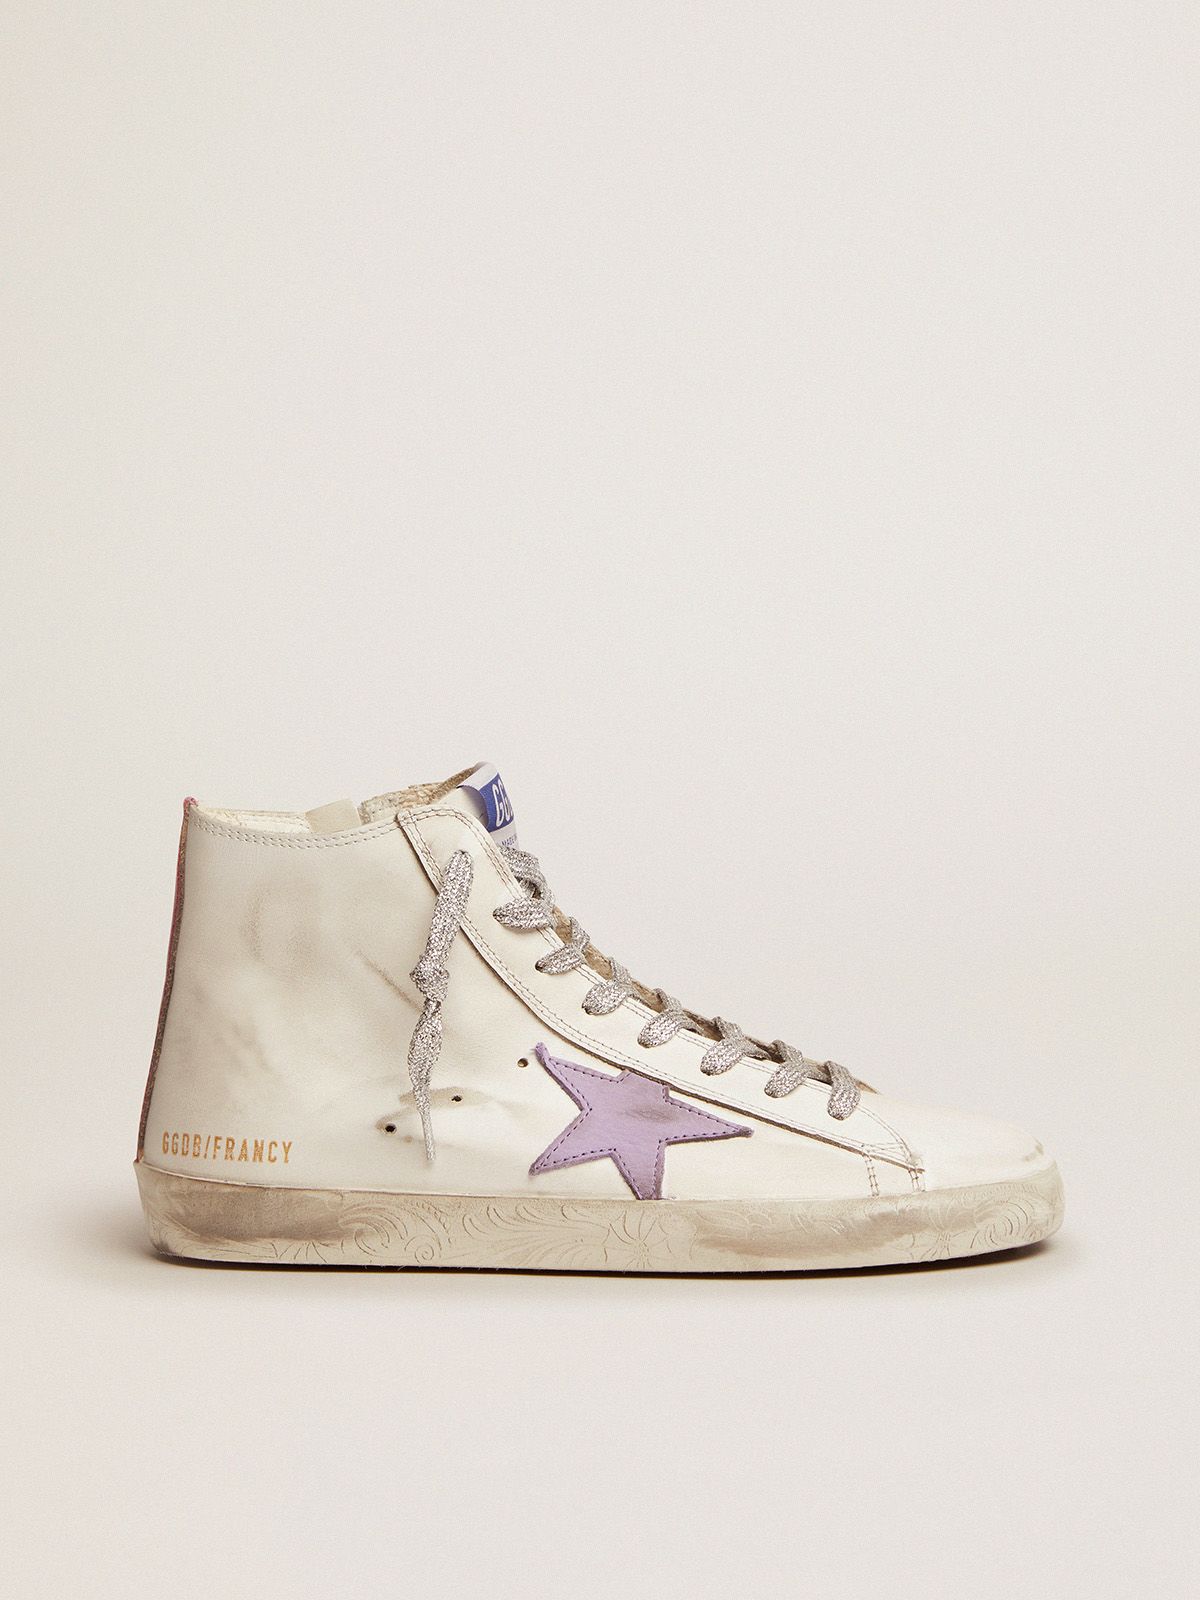 Golden Goose Uomo Saldi Francy sneakers with foxing with floral decorations and lavender-colored star